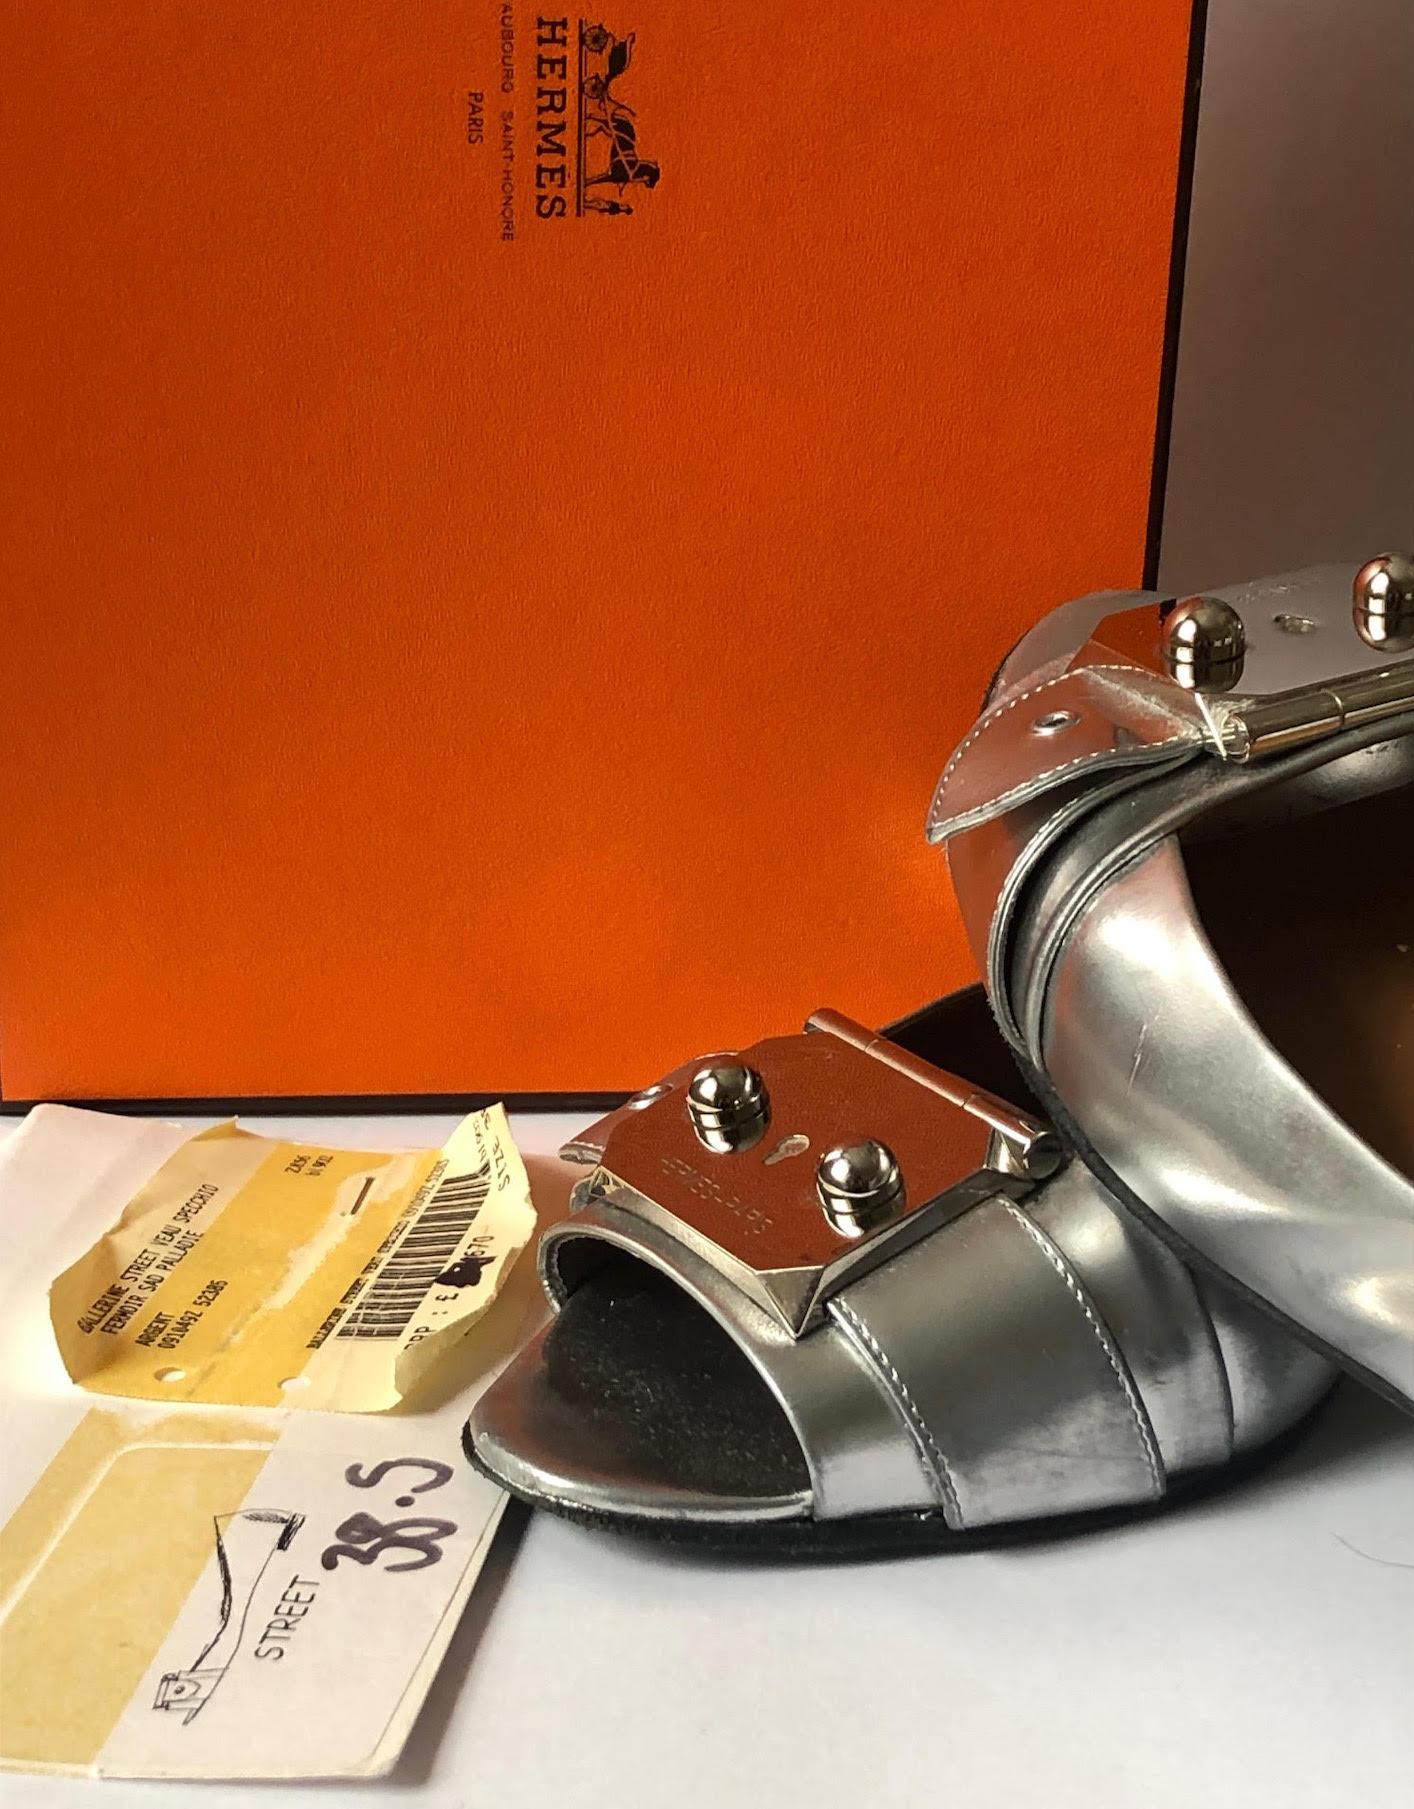 HERMÈS Silver Metallic Leather Ballerina HERMÈS SAD Palladie Clasp Flats Size 38.5

Hermès ballerina Street in silver with SAD  PALLADIE, Hermès Logo Clasp. These flats open peep toe ballerinas are handcrafted with Veau Specchio leather in